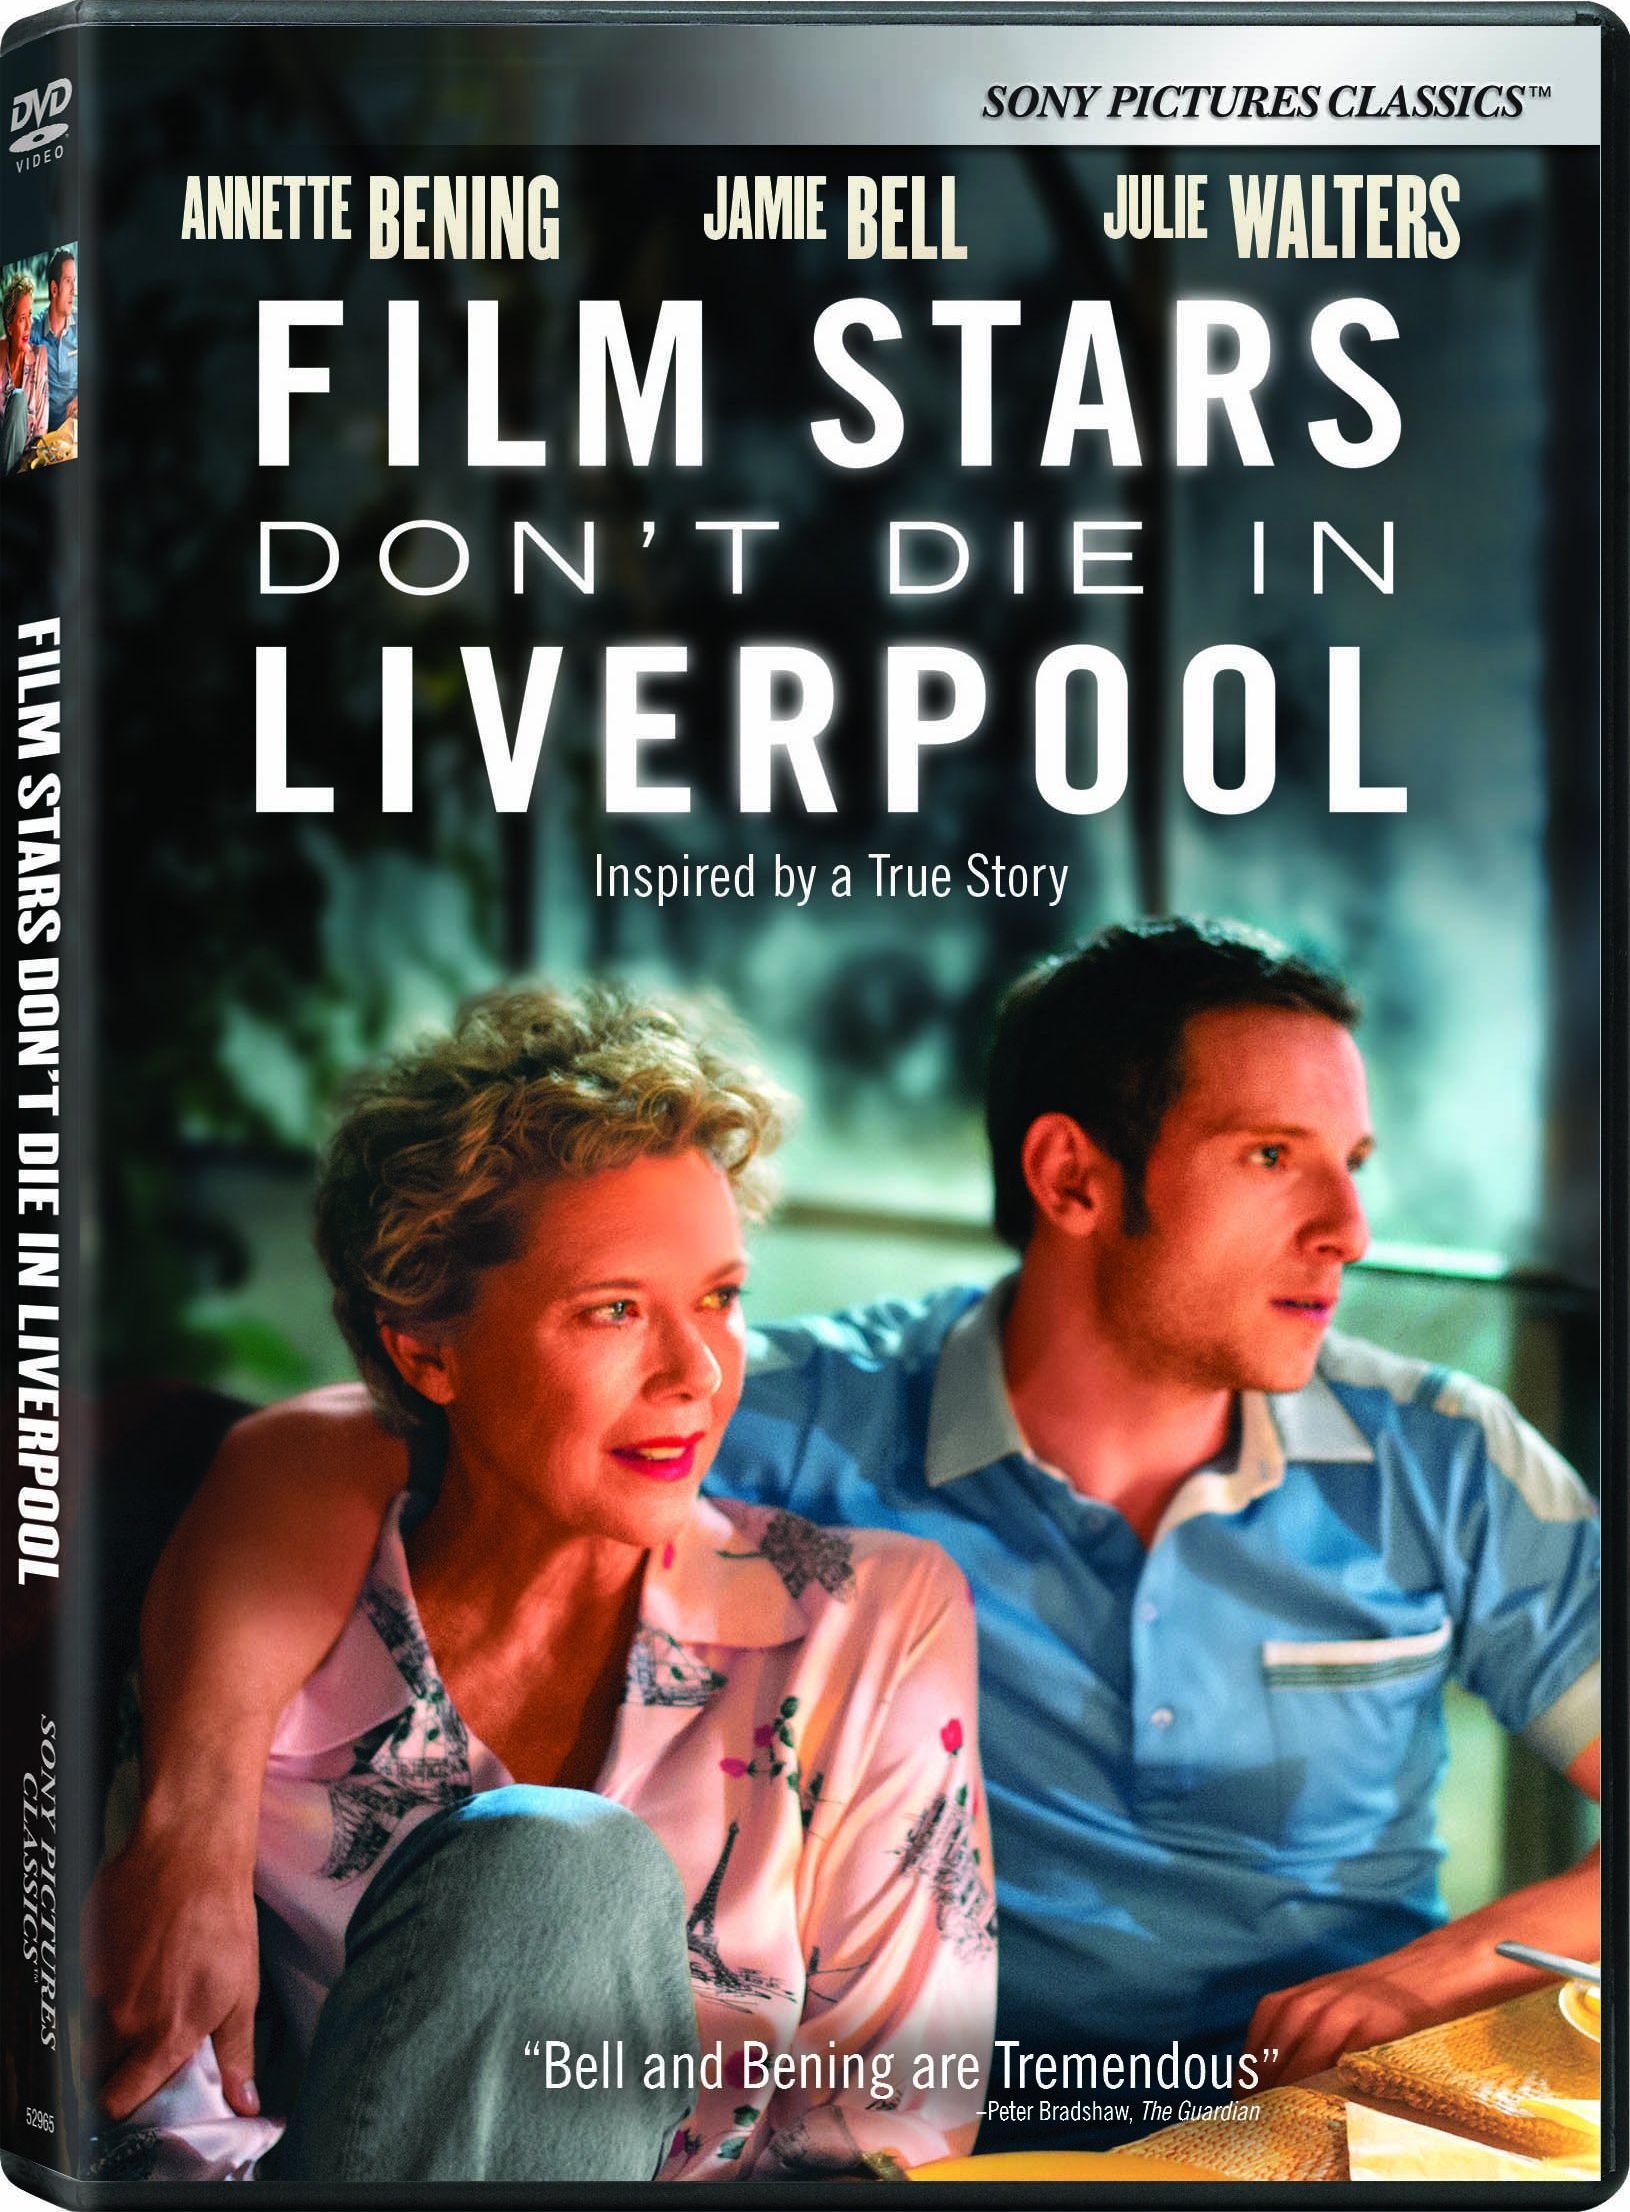 Film Stars Don't Die in Liverpool DVD Release Date April 